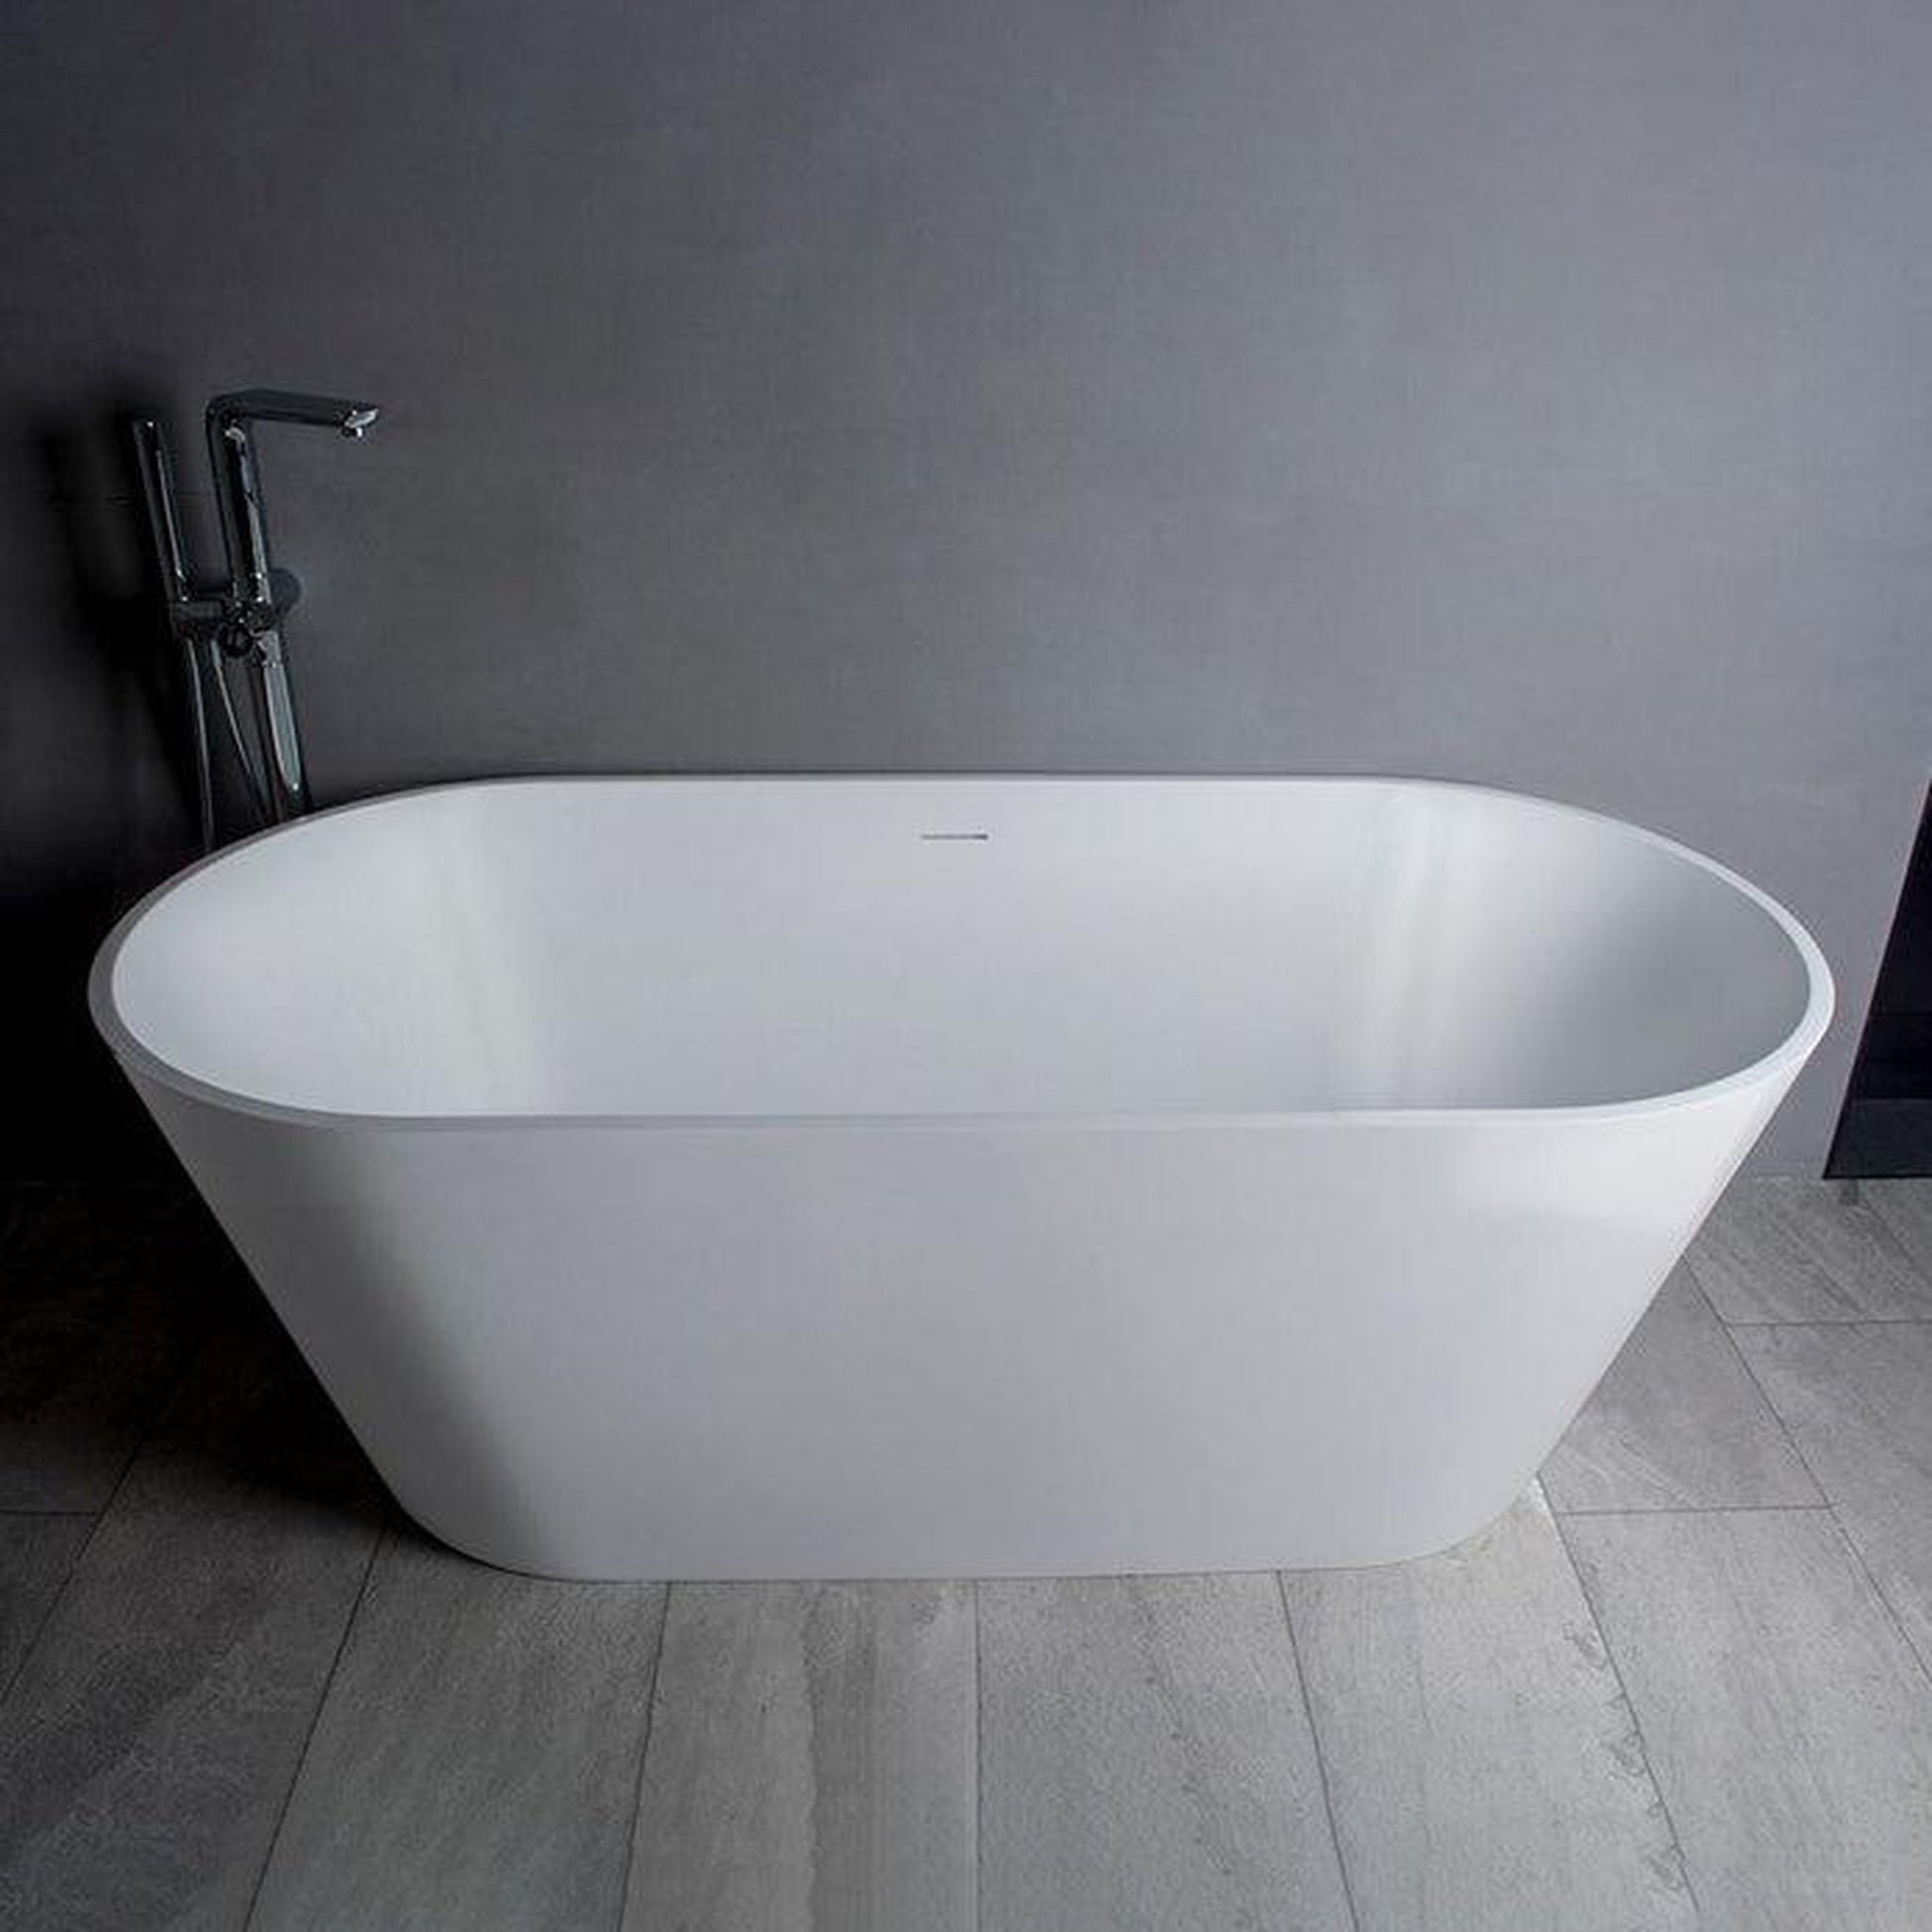 Vanity Art 65" Glossy White Solid Surface Resin Stone Freestanding Bathtub With Overflow and Pop-up Drain